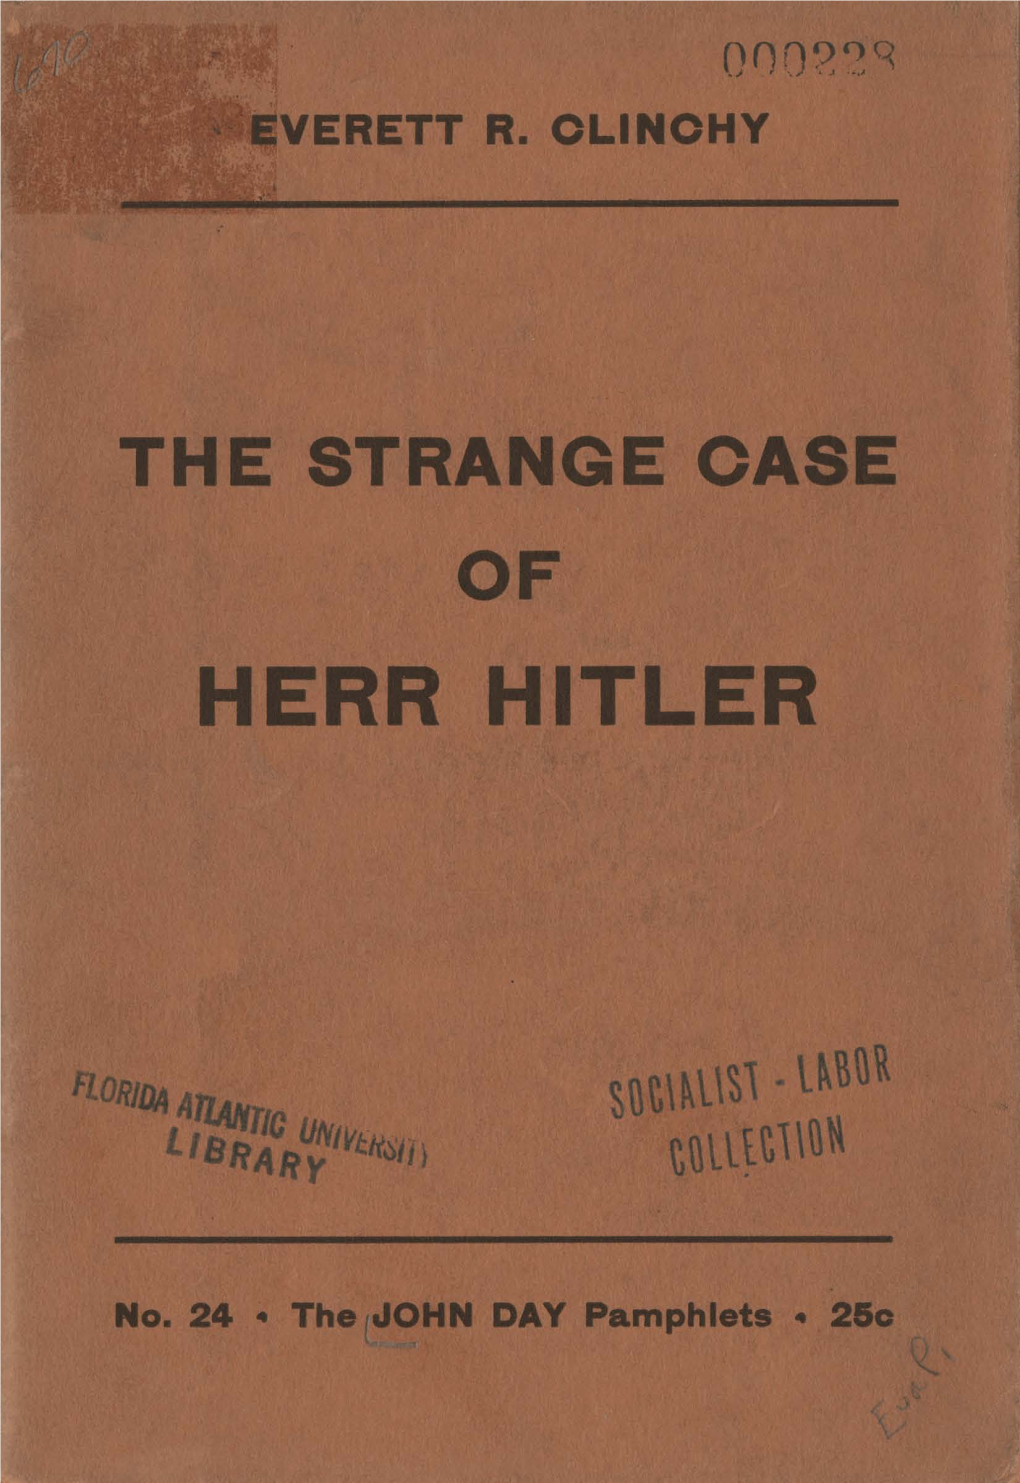 THE STRANGE CASE of HERR HITLER" Is Sent You with the Compliments of the NATIONAL CONFERENCE of JEWS & CHRISTIANS